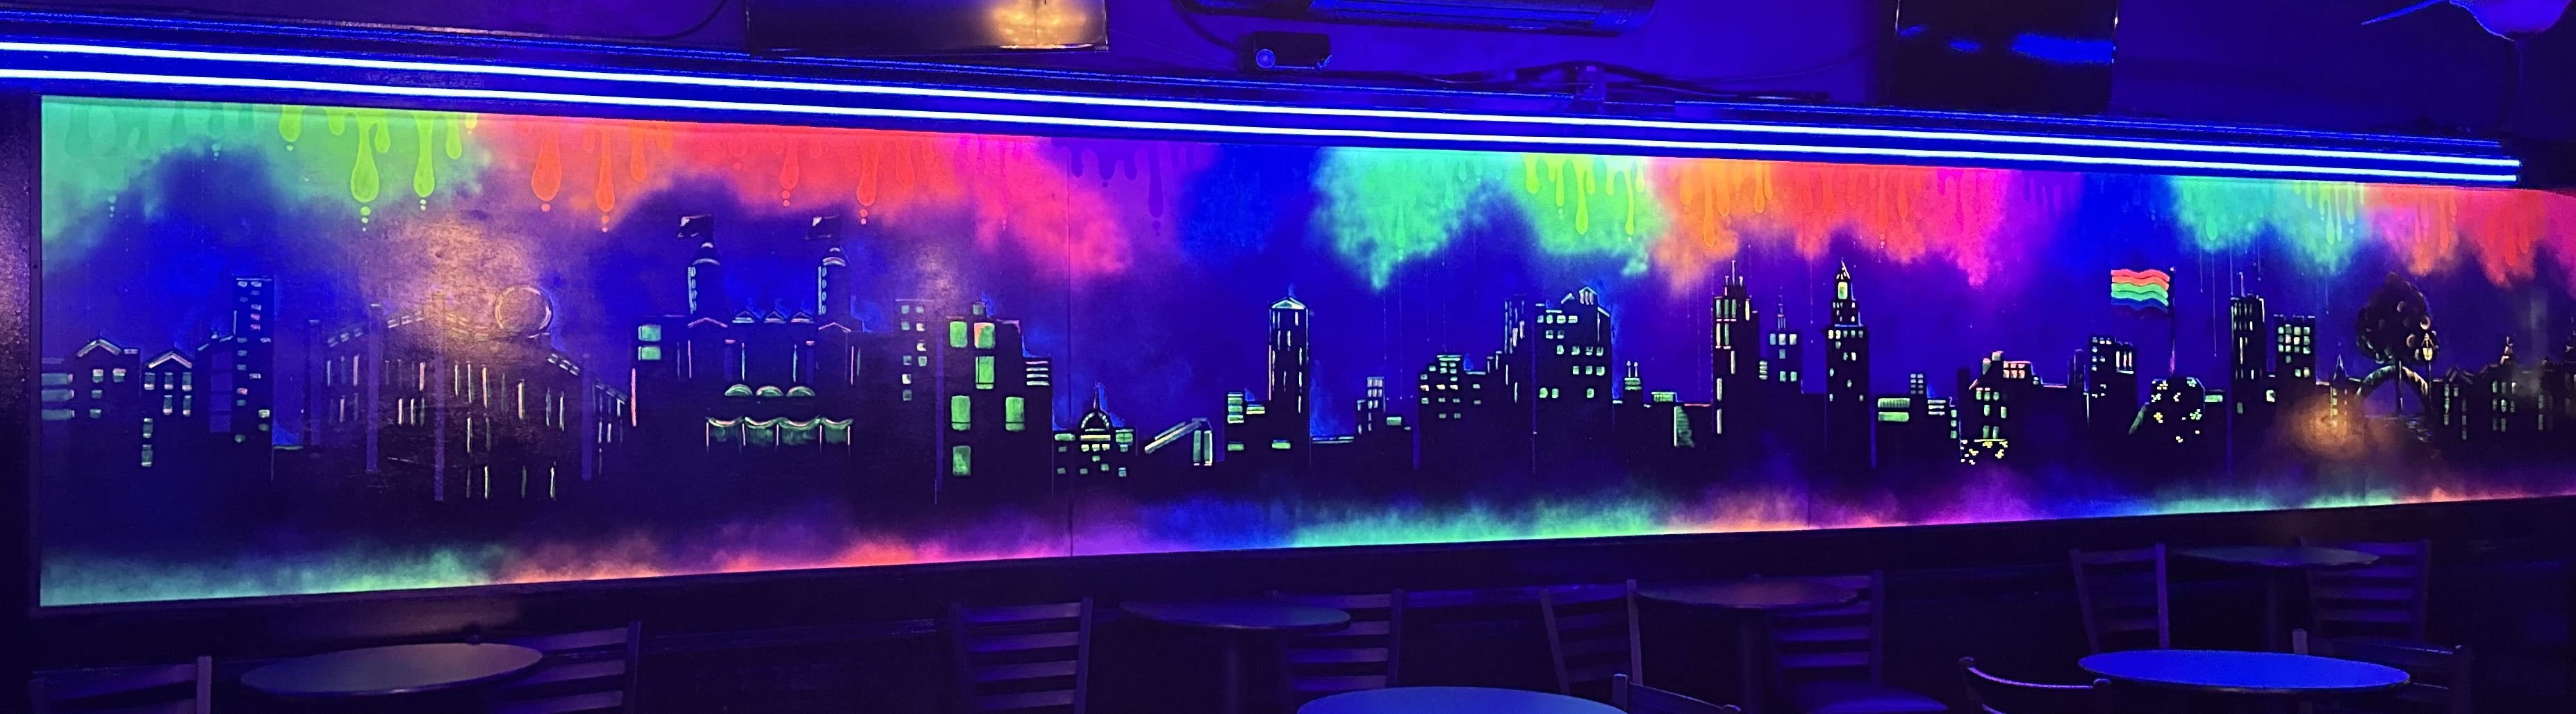 A mural depicting the Worcester cityscape at night with green, red, pink, and orange paint.